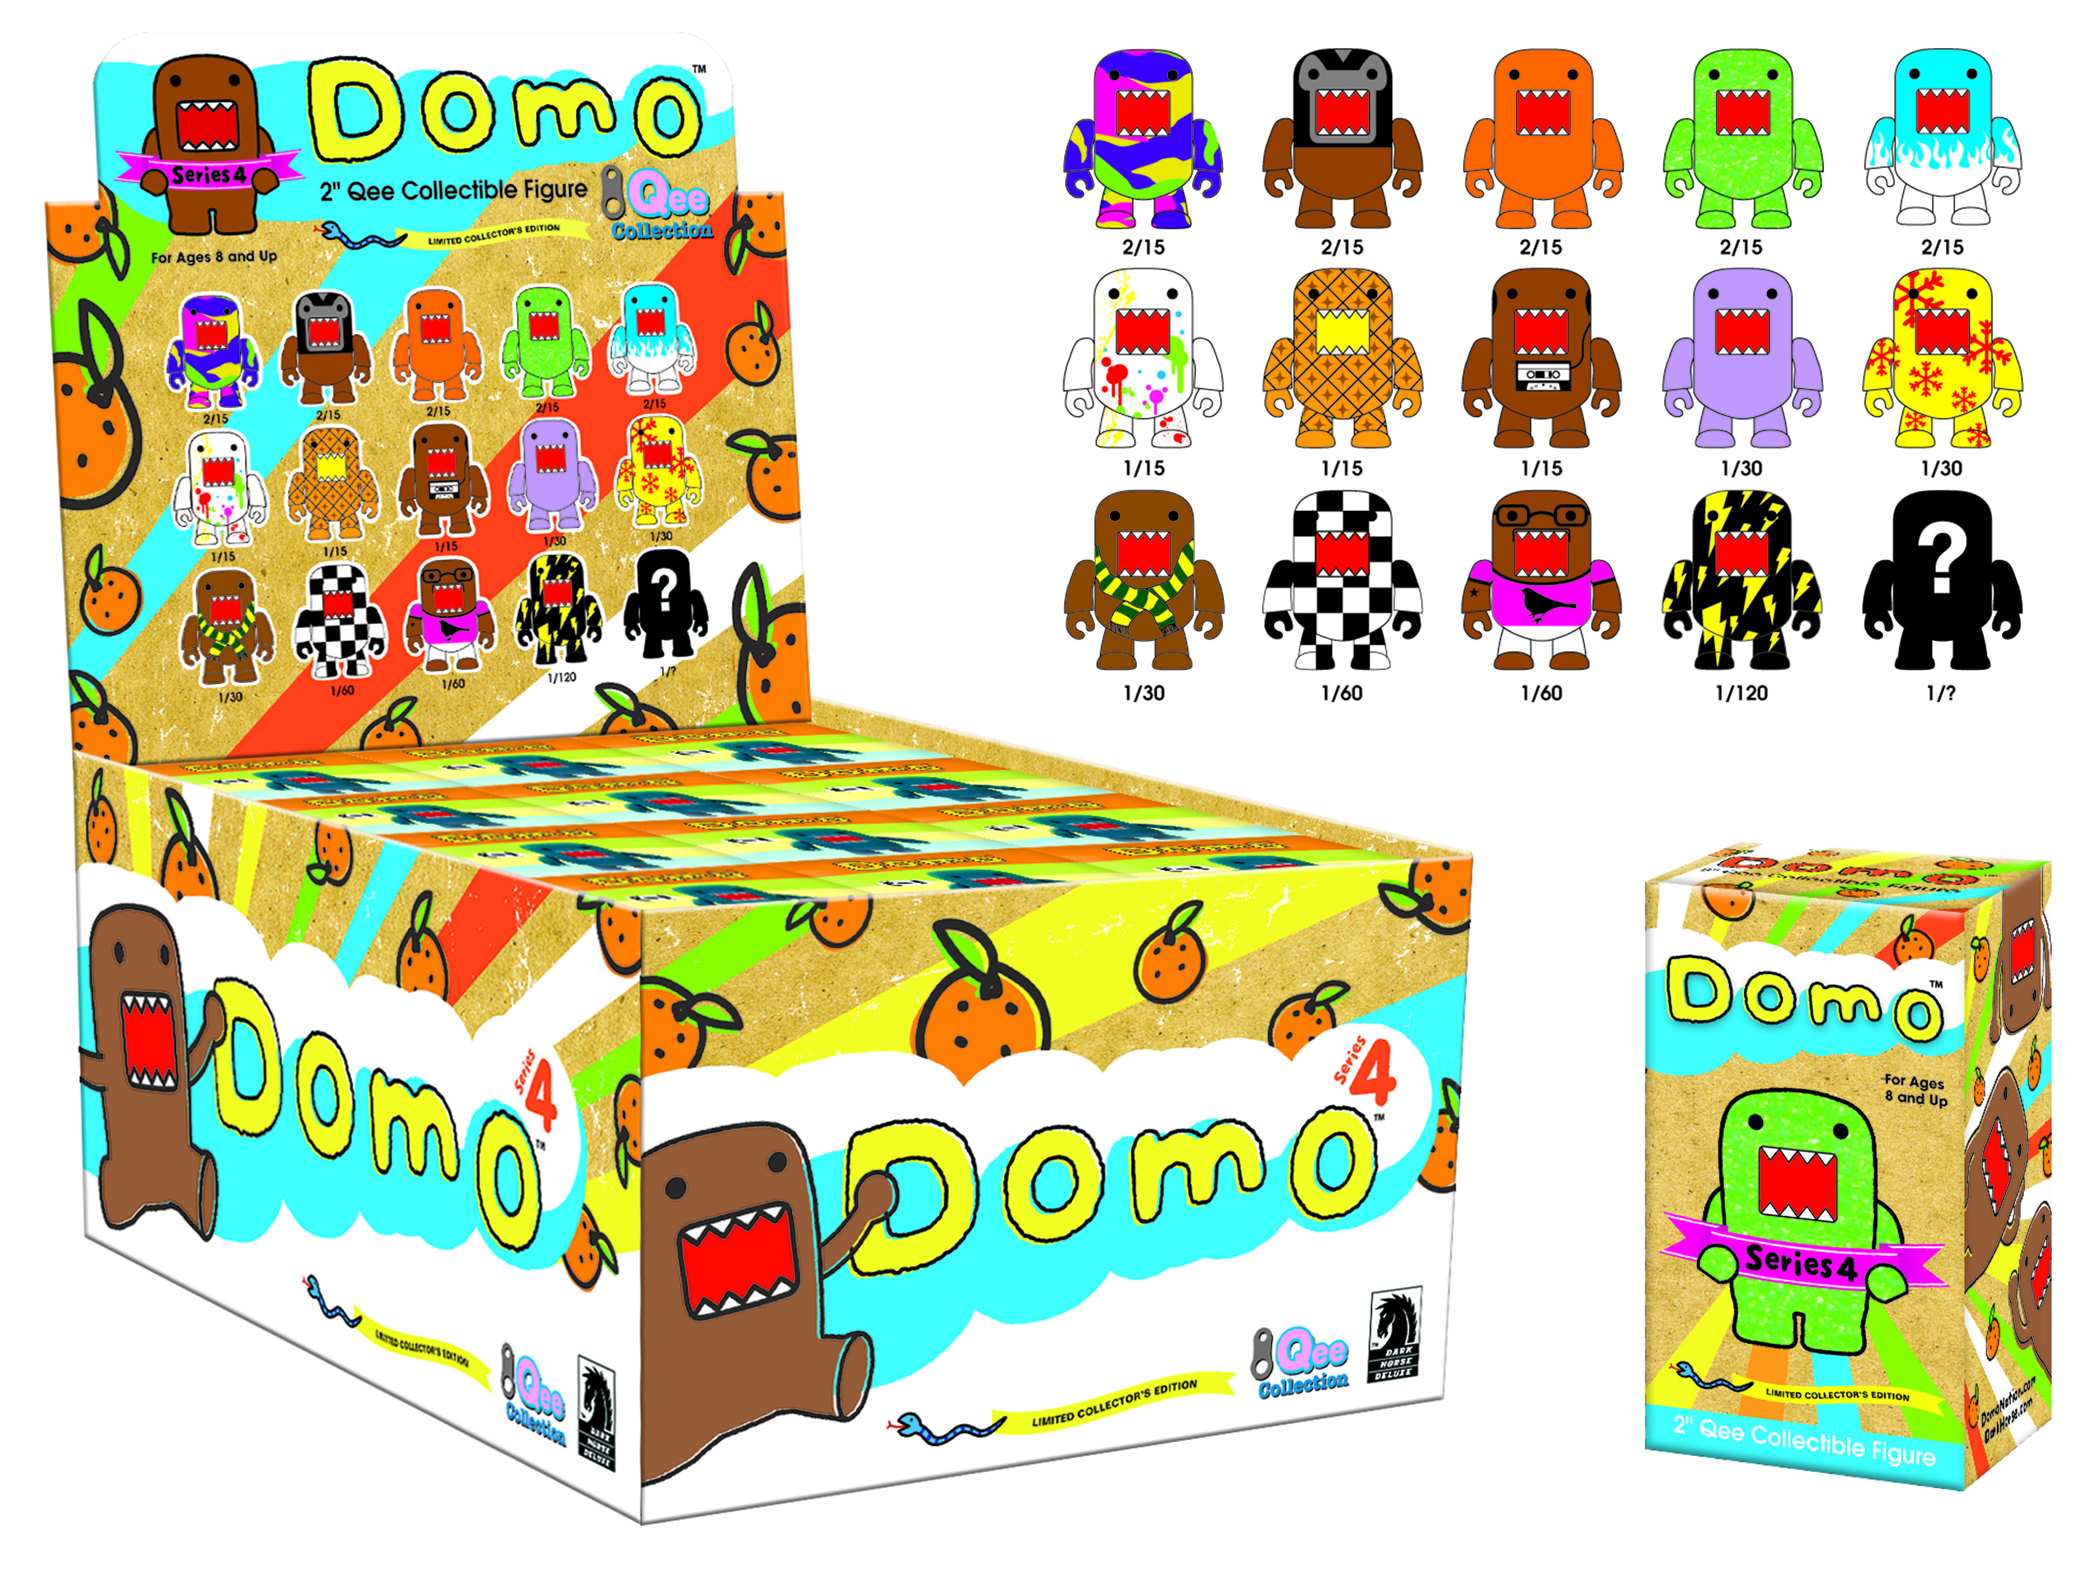 DOMO QEE SERIES 4 MYSTERY DISPLAY CASE